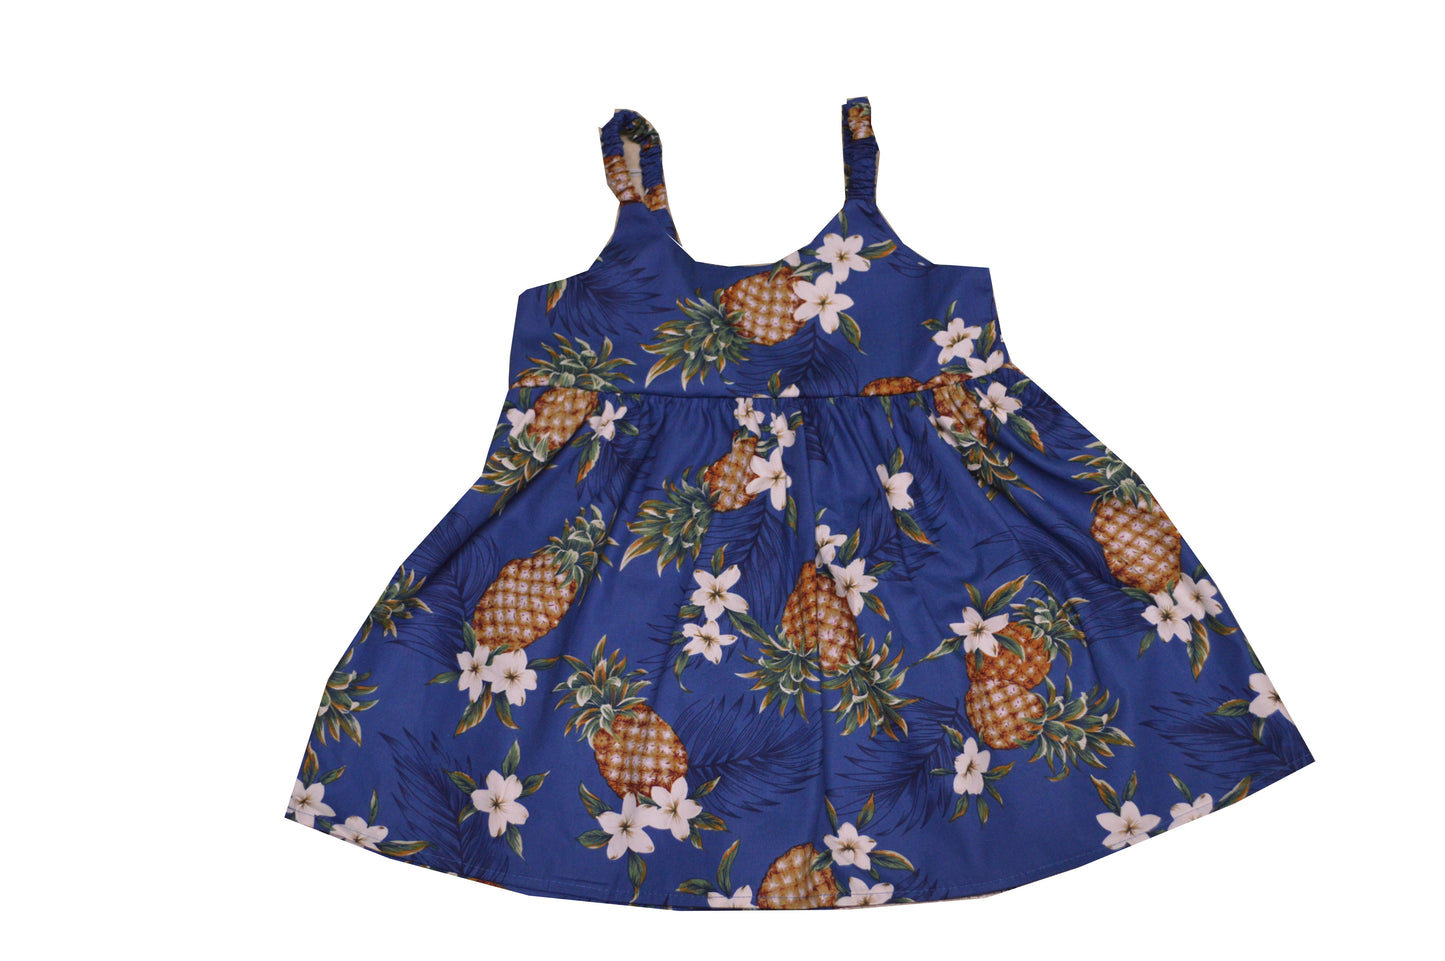 Pineapple Summer Bungee dress for Little Princess Soft Cotton Made in Hawaii